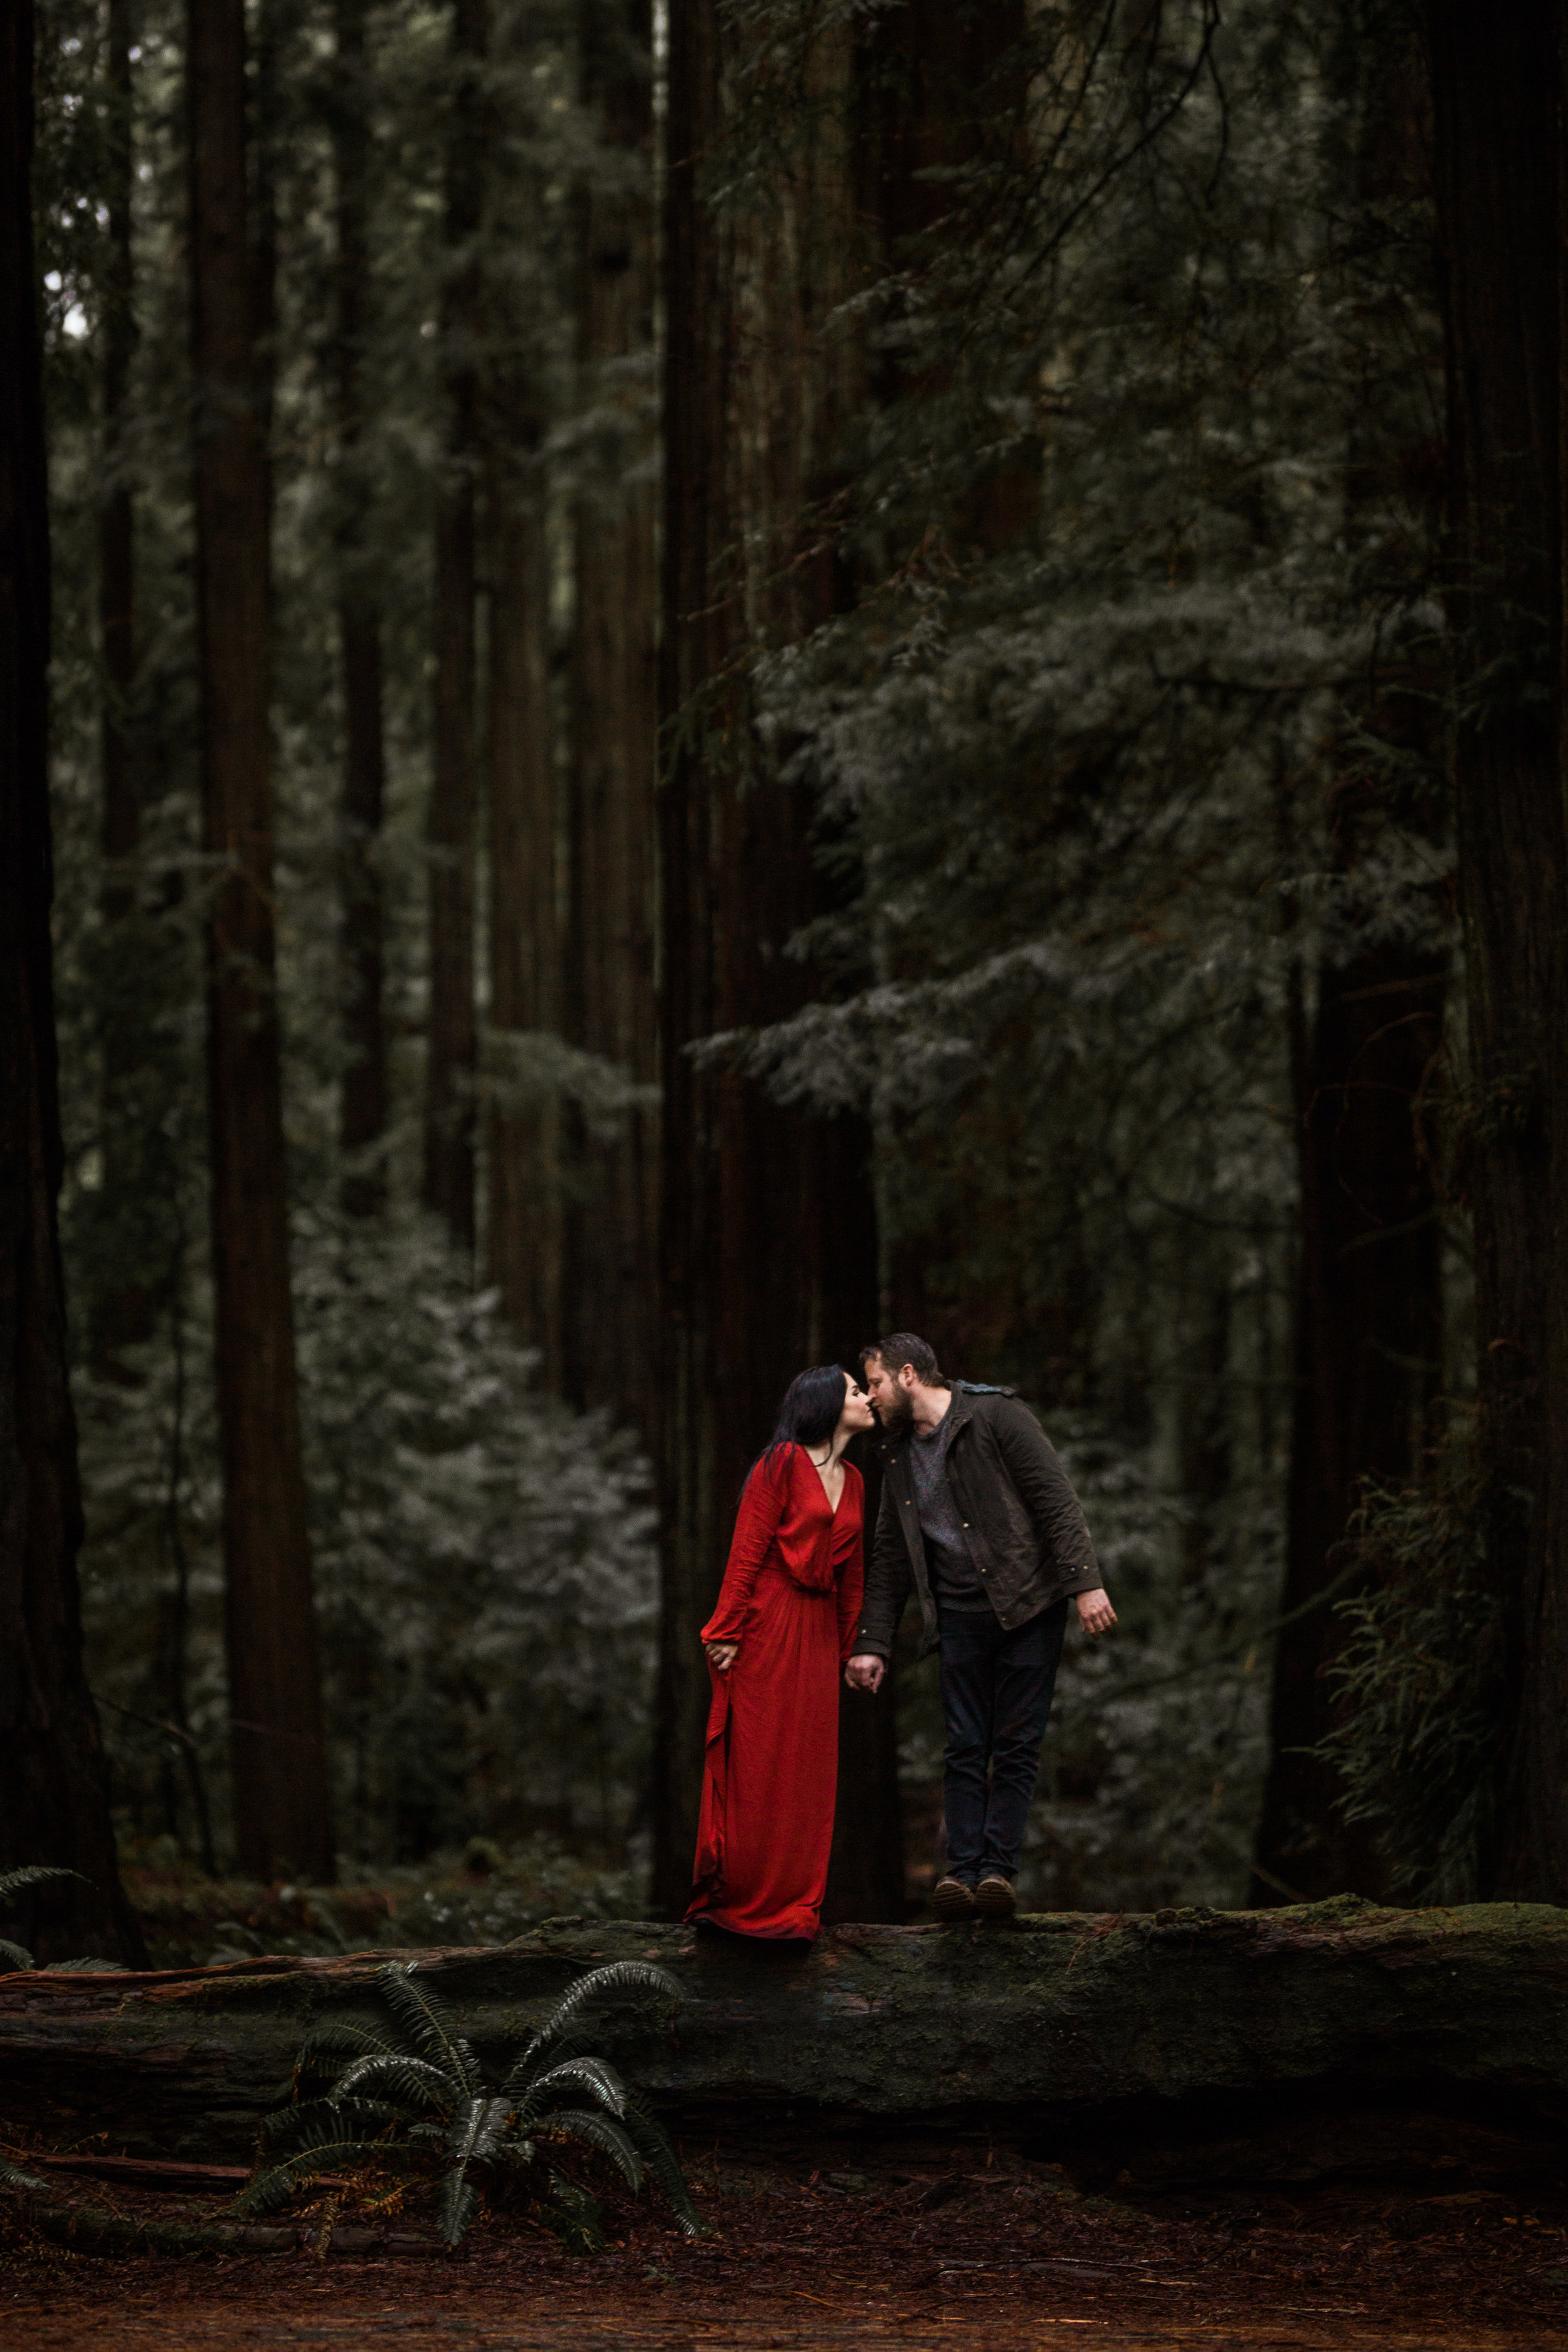 nicole-daacke-photography-redwoods-national-park-forest-rainy-foggy-adventure-engagement-session-humboldt-county-old-growth-redwood-tree-elopement-intimate-wedding-photographer-56.jpg